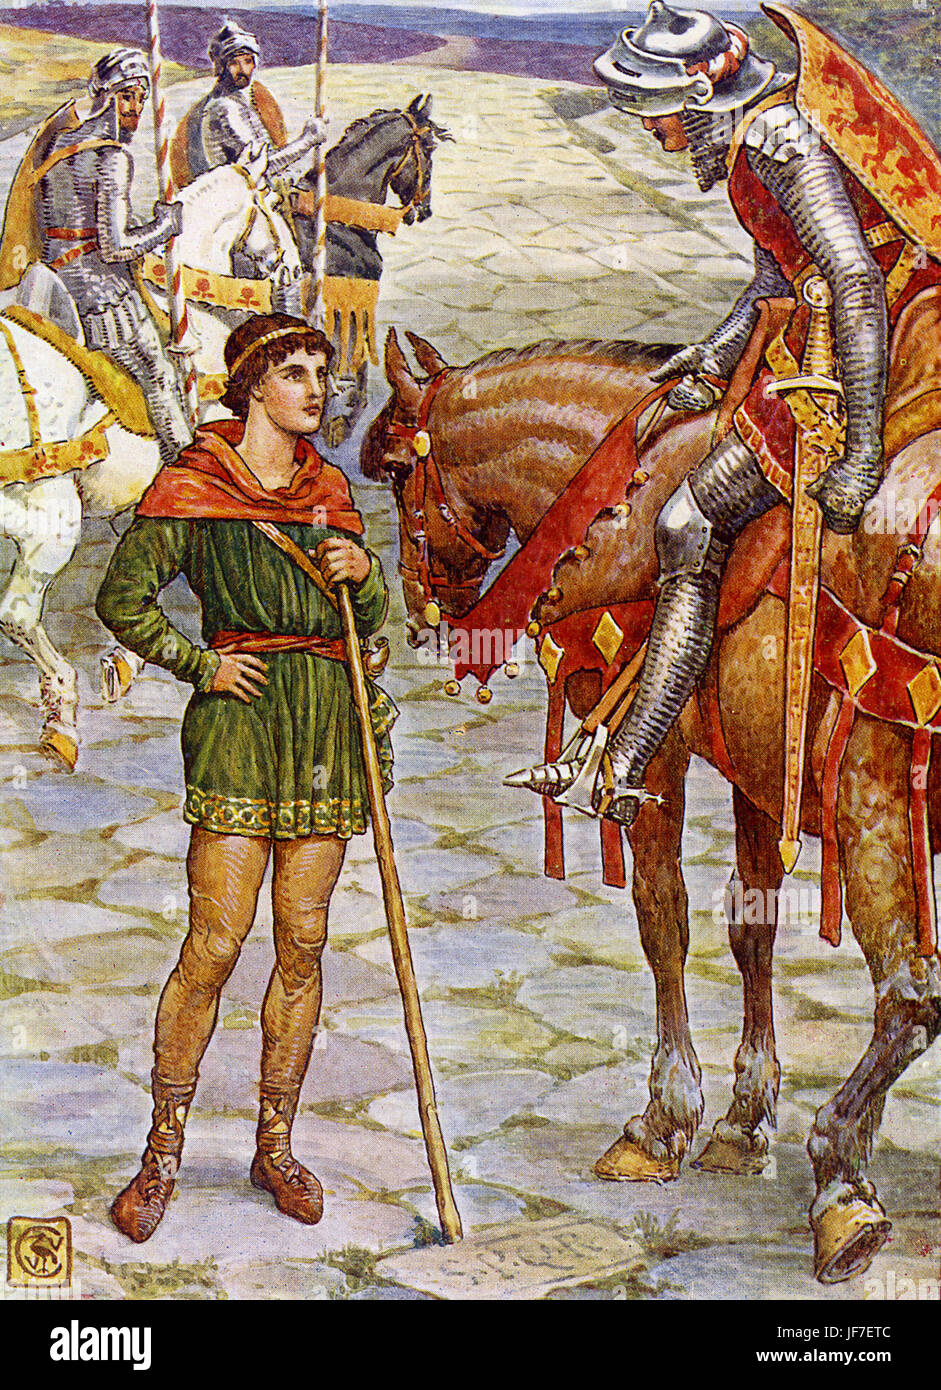 Perceval and Sir Owen  in King Arthur's Knights by Henry Gilbert. 'Young Perceval questions Sir Owen'. Illustration by Walter Crane, circa 1911.WC: English artist of Arts and Crafts movement, 15 August 1845 - 14 March 1915 Stock Photo